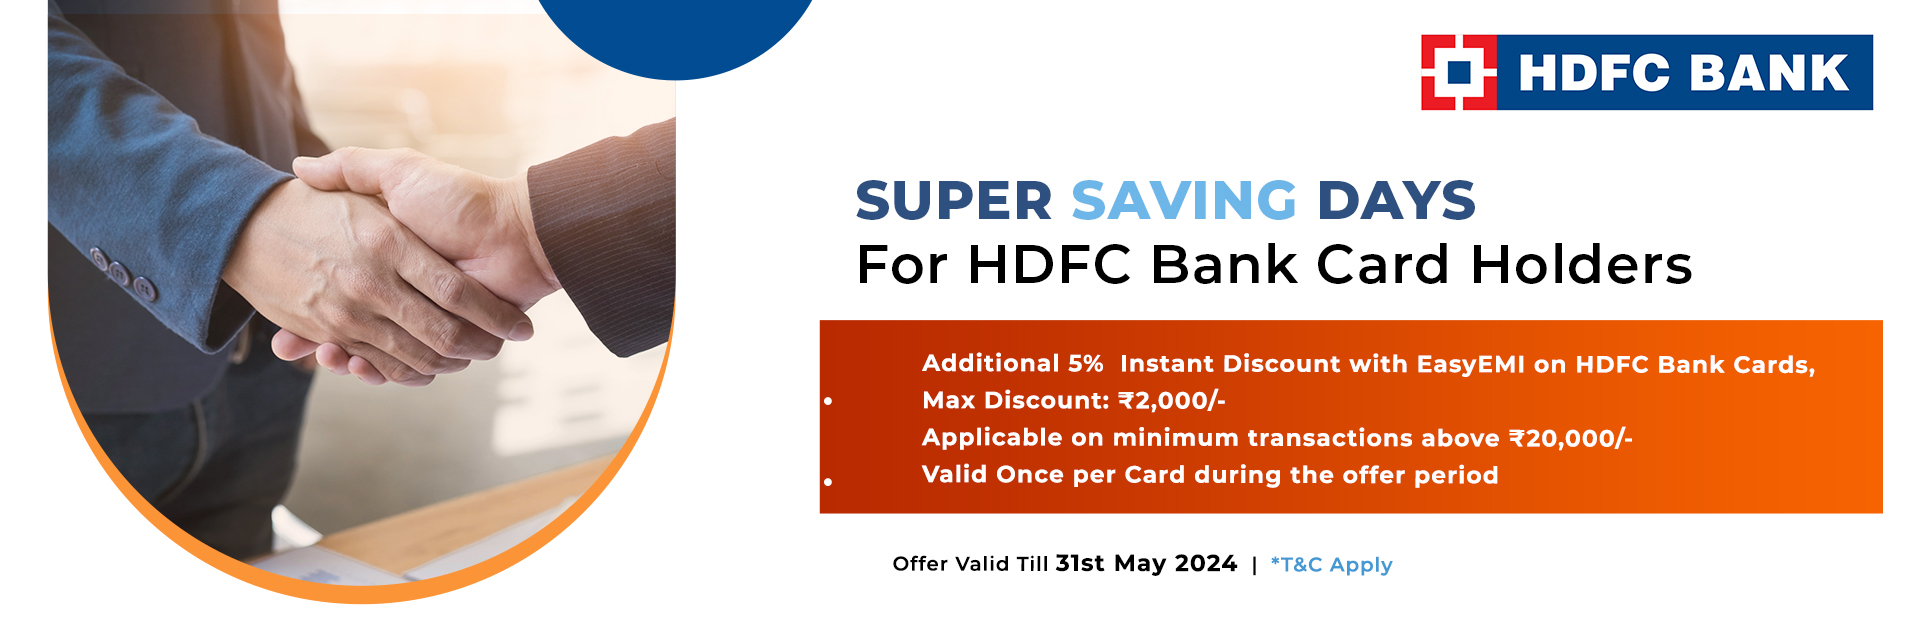 Exclusive HDFC Offers at Clove Dental upto Rs. 2000/- off